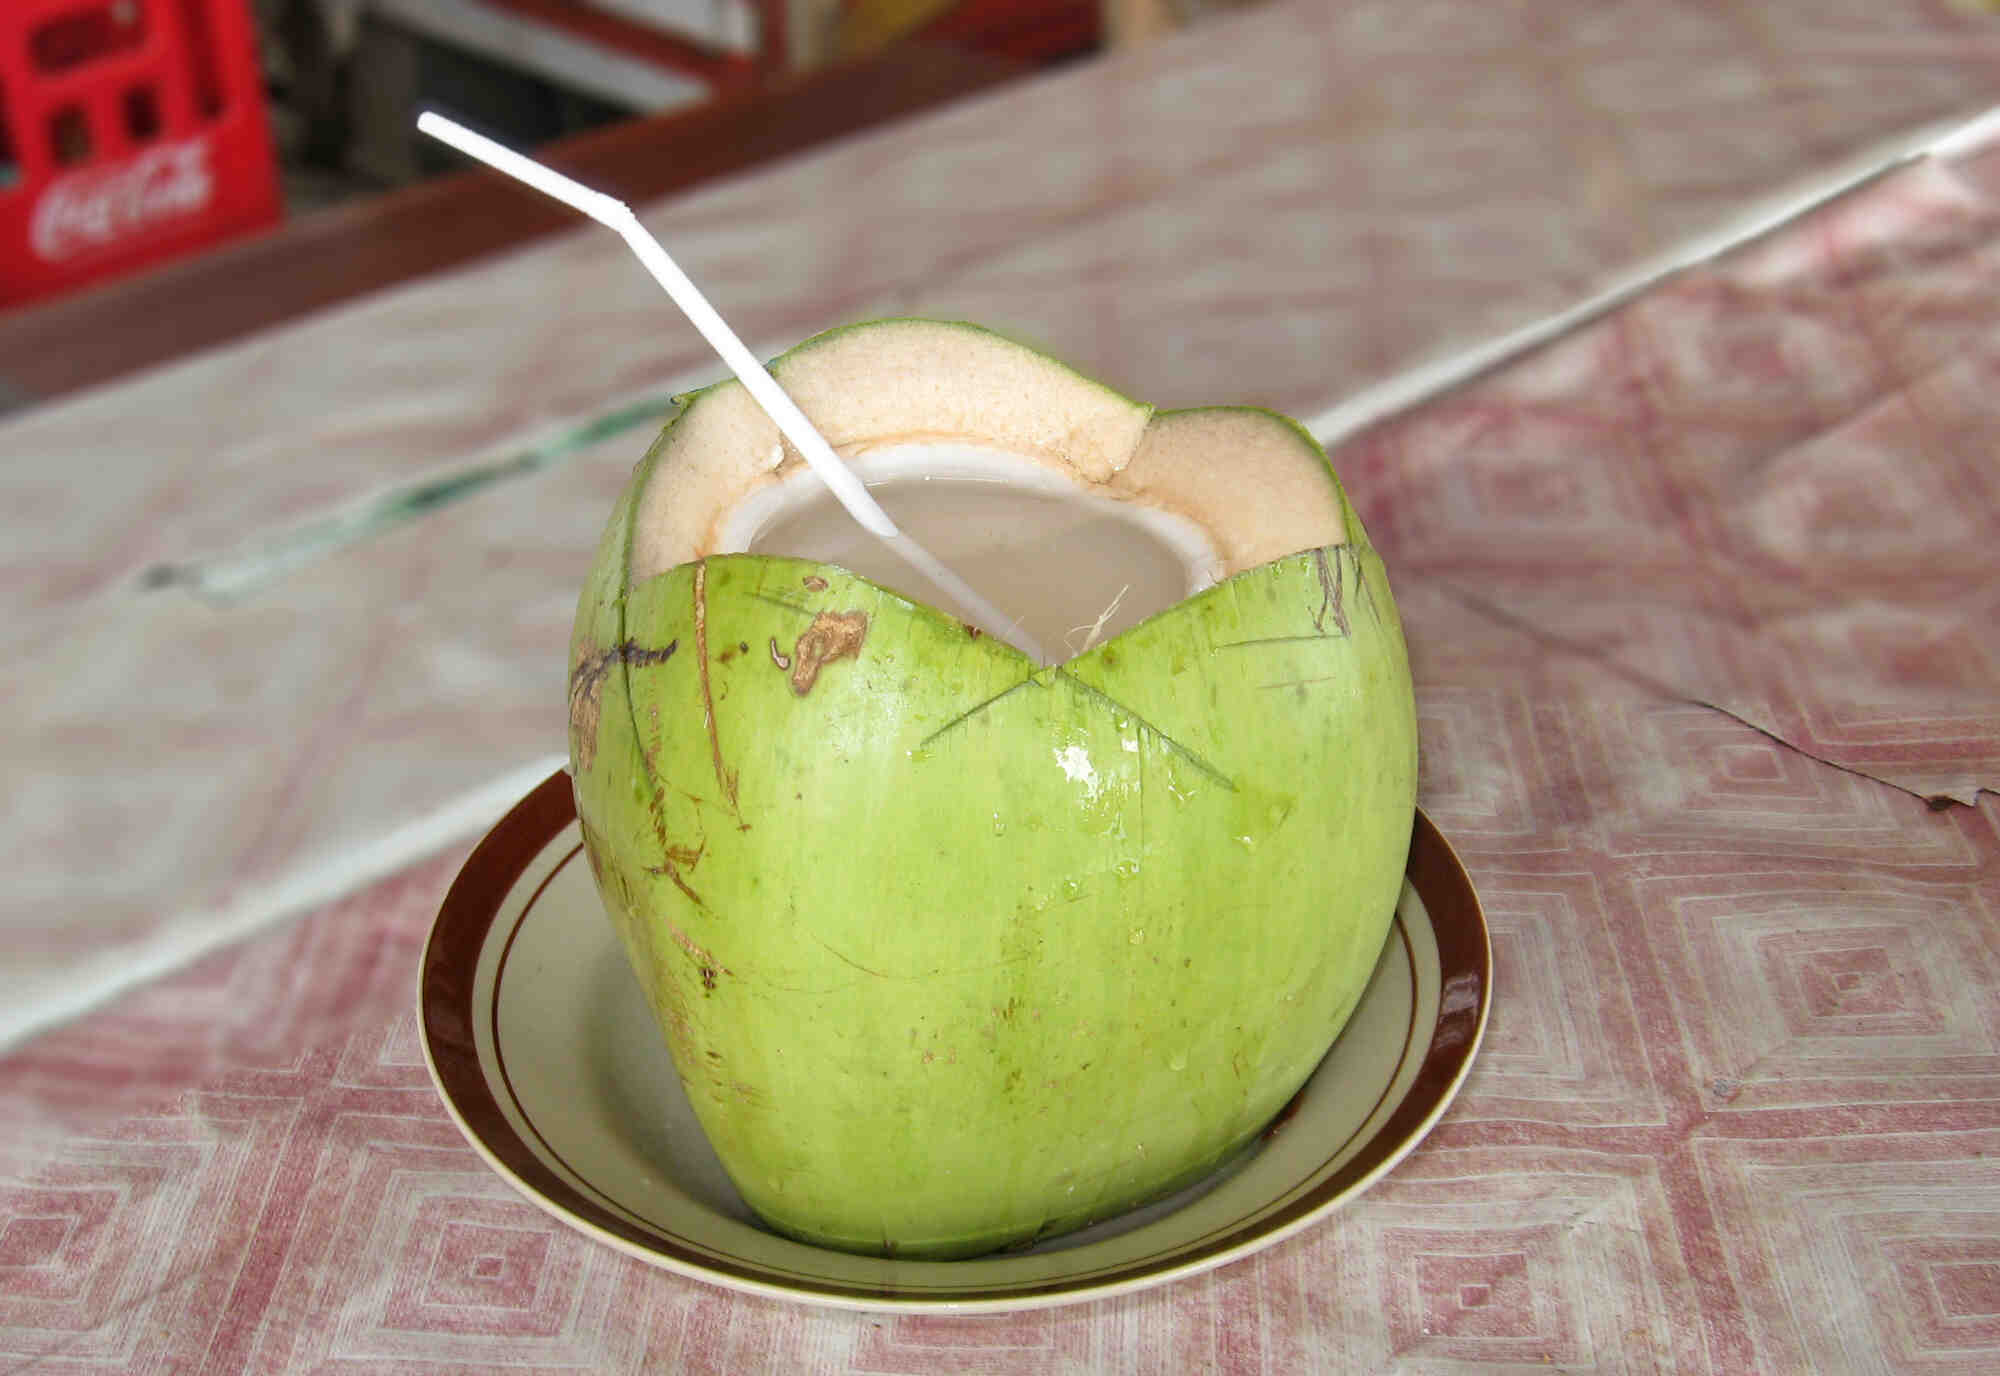 How do you drink coconut water?